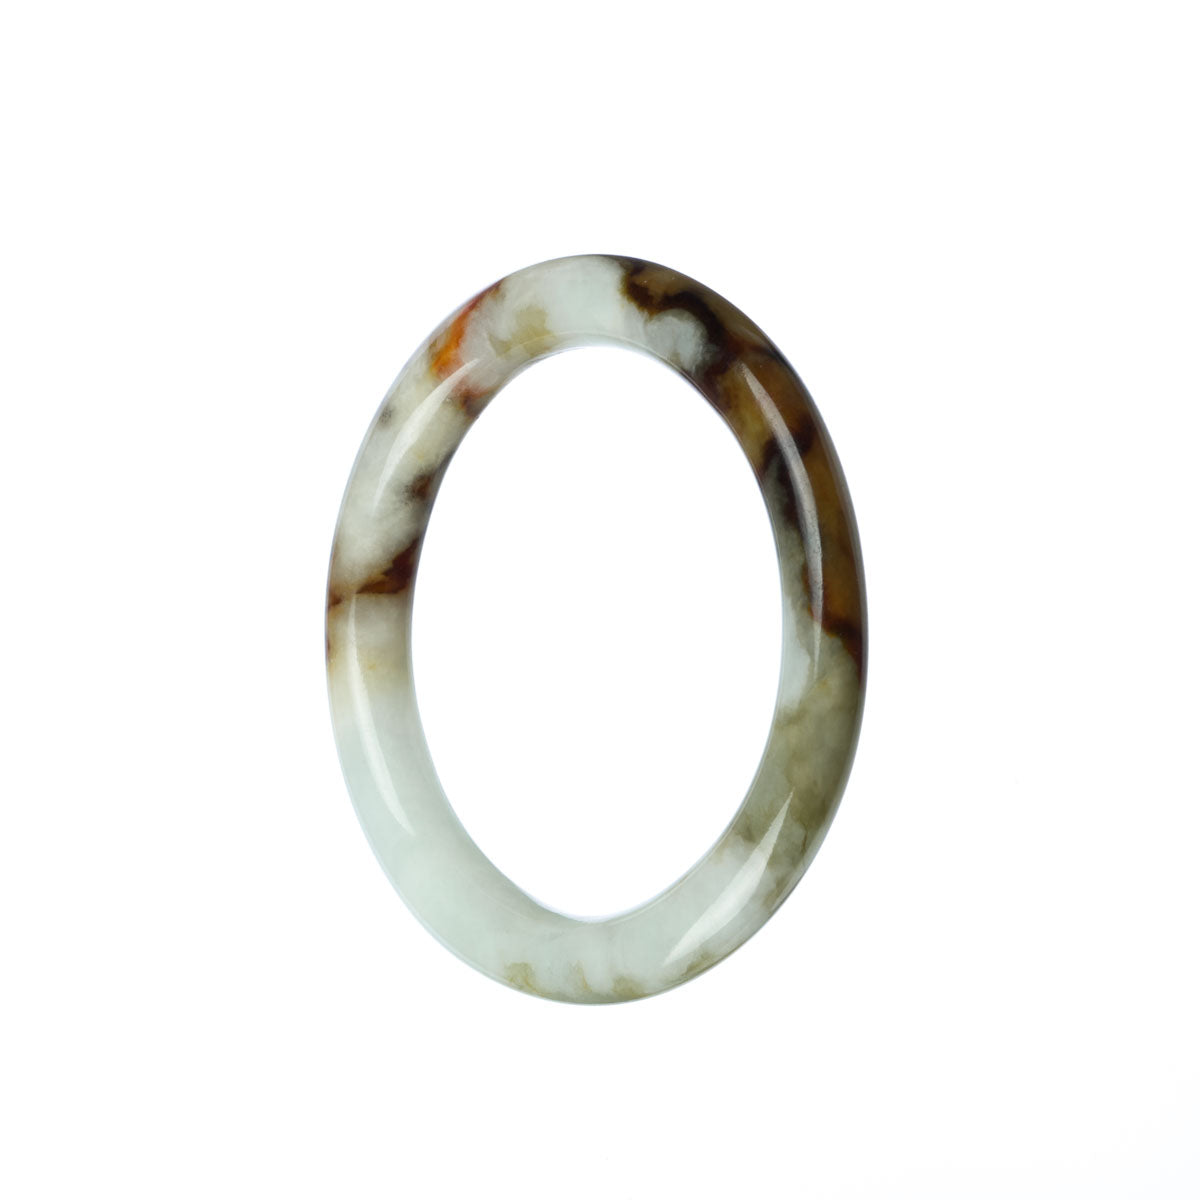 A close-up photograph of a small, delicate jade bracelet with a white and brown color pattern. The bracelet has a traditional design and is made of high-quality jade. It has a petite size, measuring 50mm in diameter. The brand name "MAYS" is mentioned in the description.